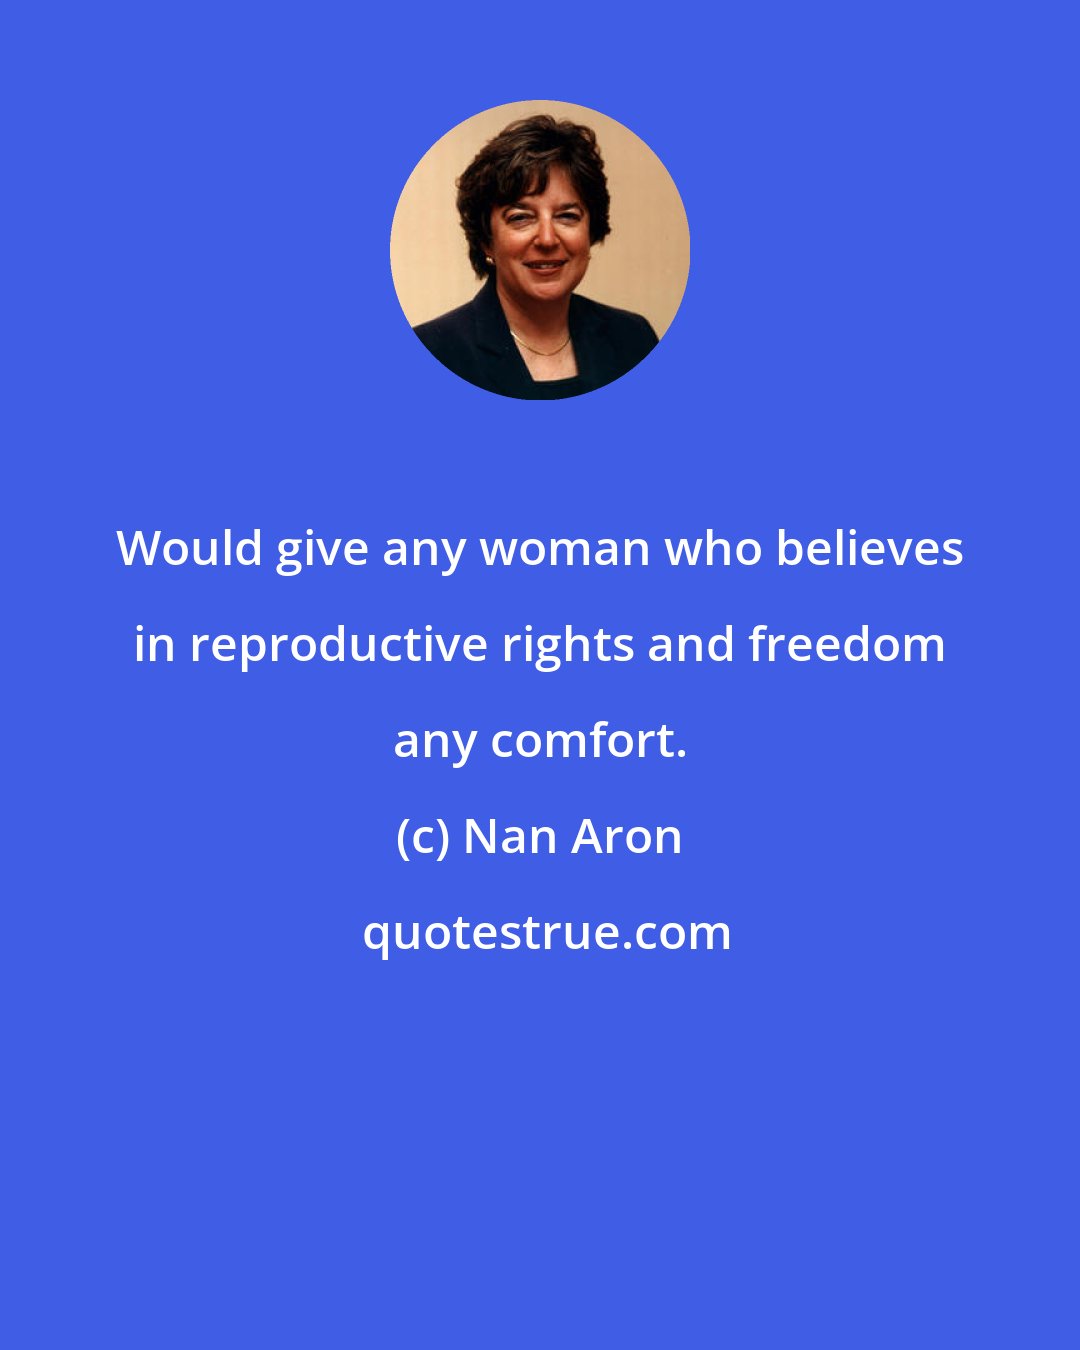 Nan Aron: Would give any woman who believes in reproductive rights and freedom any comfort.